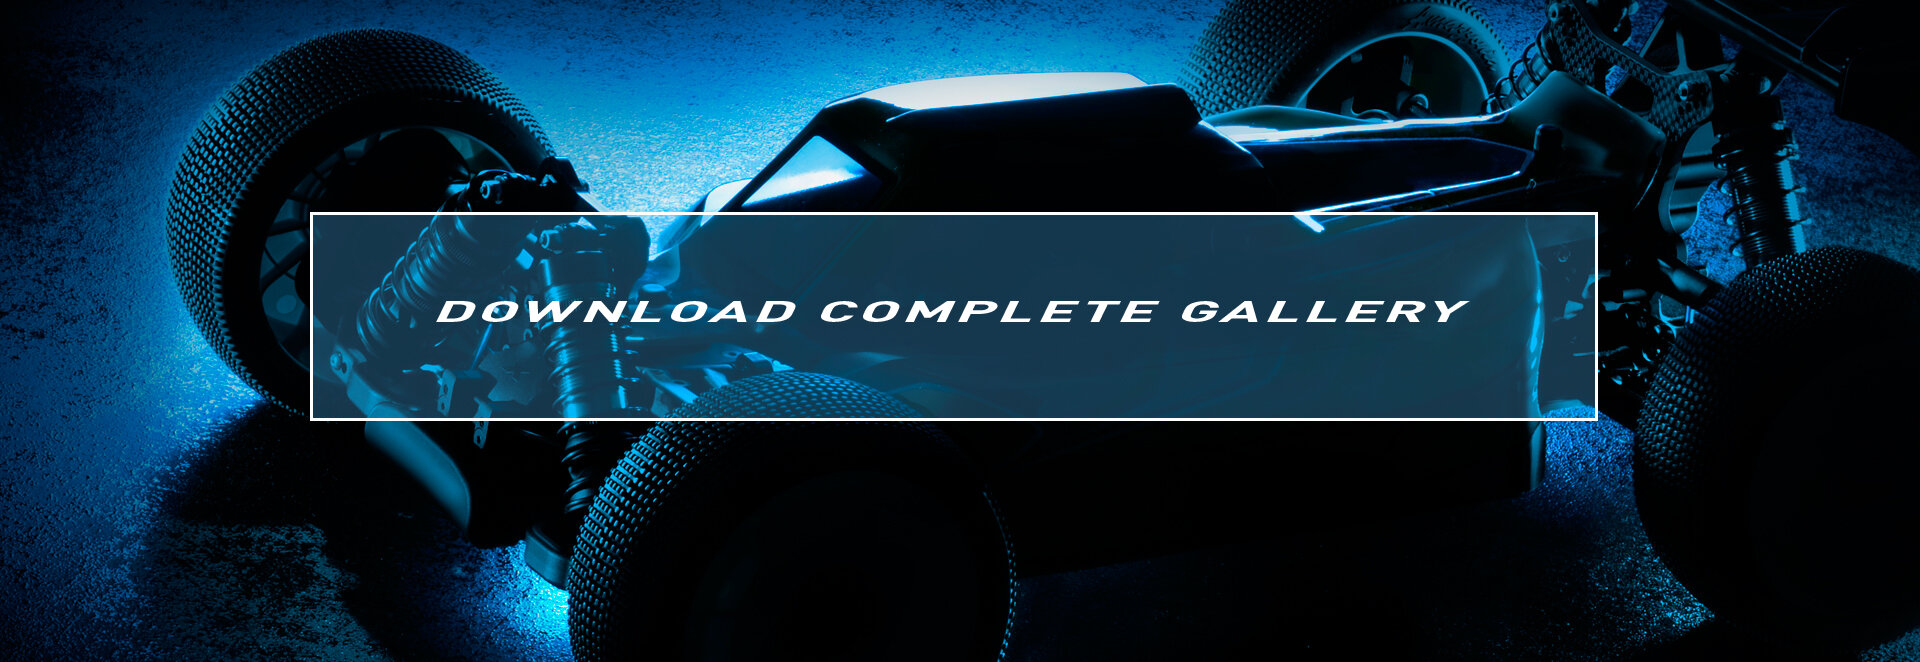 Download complete gallery